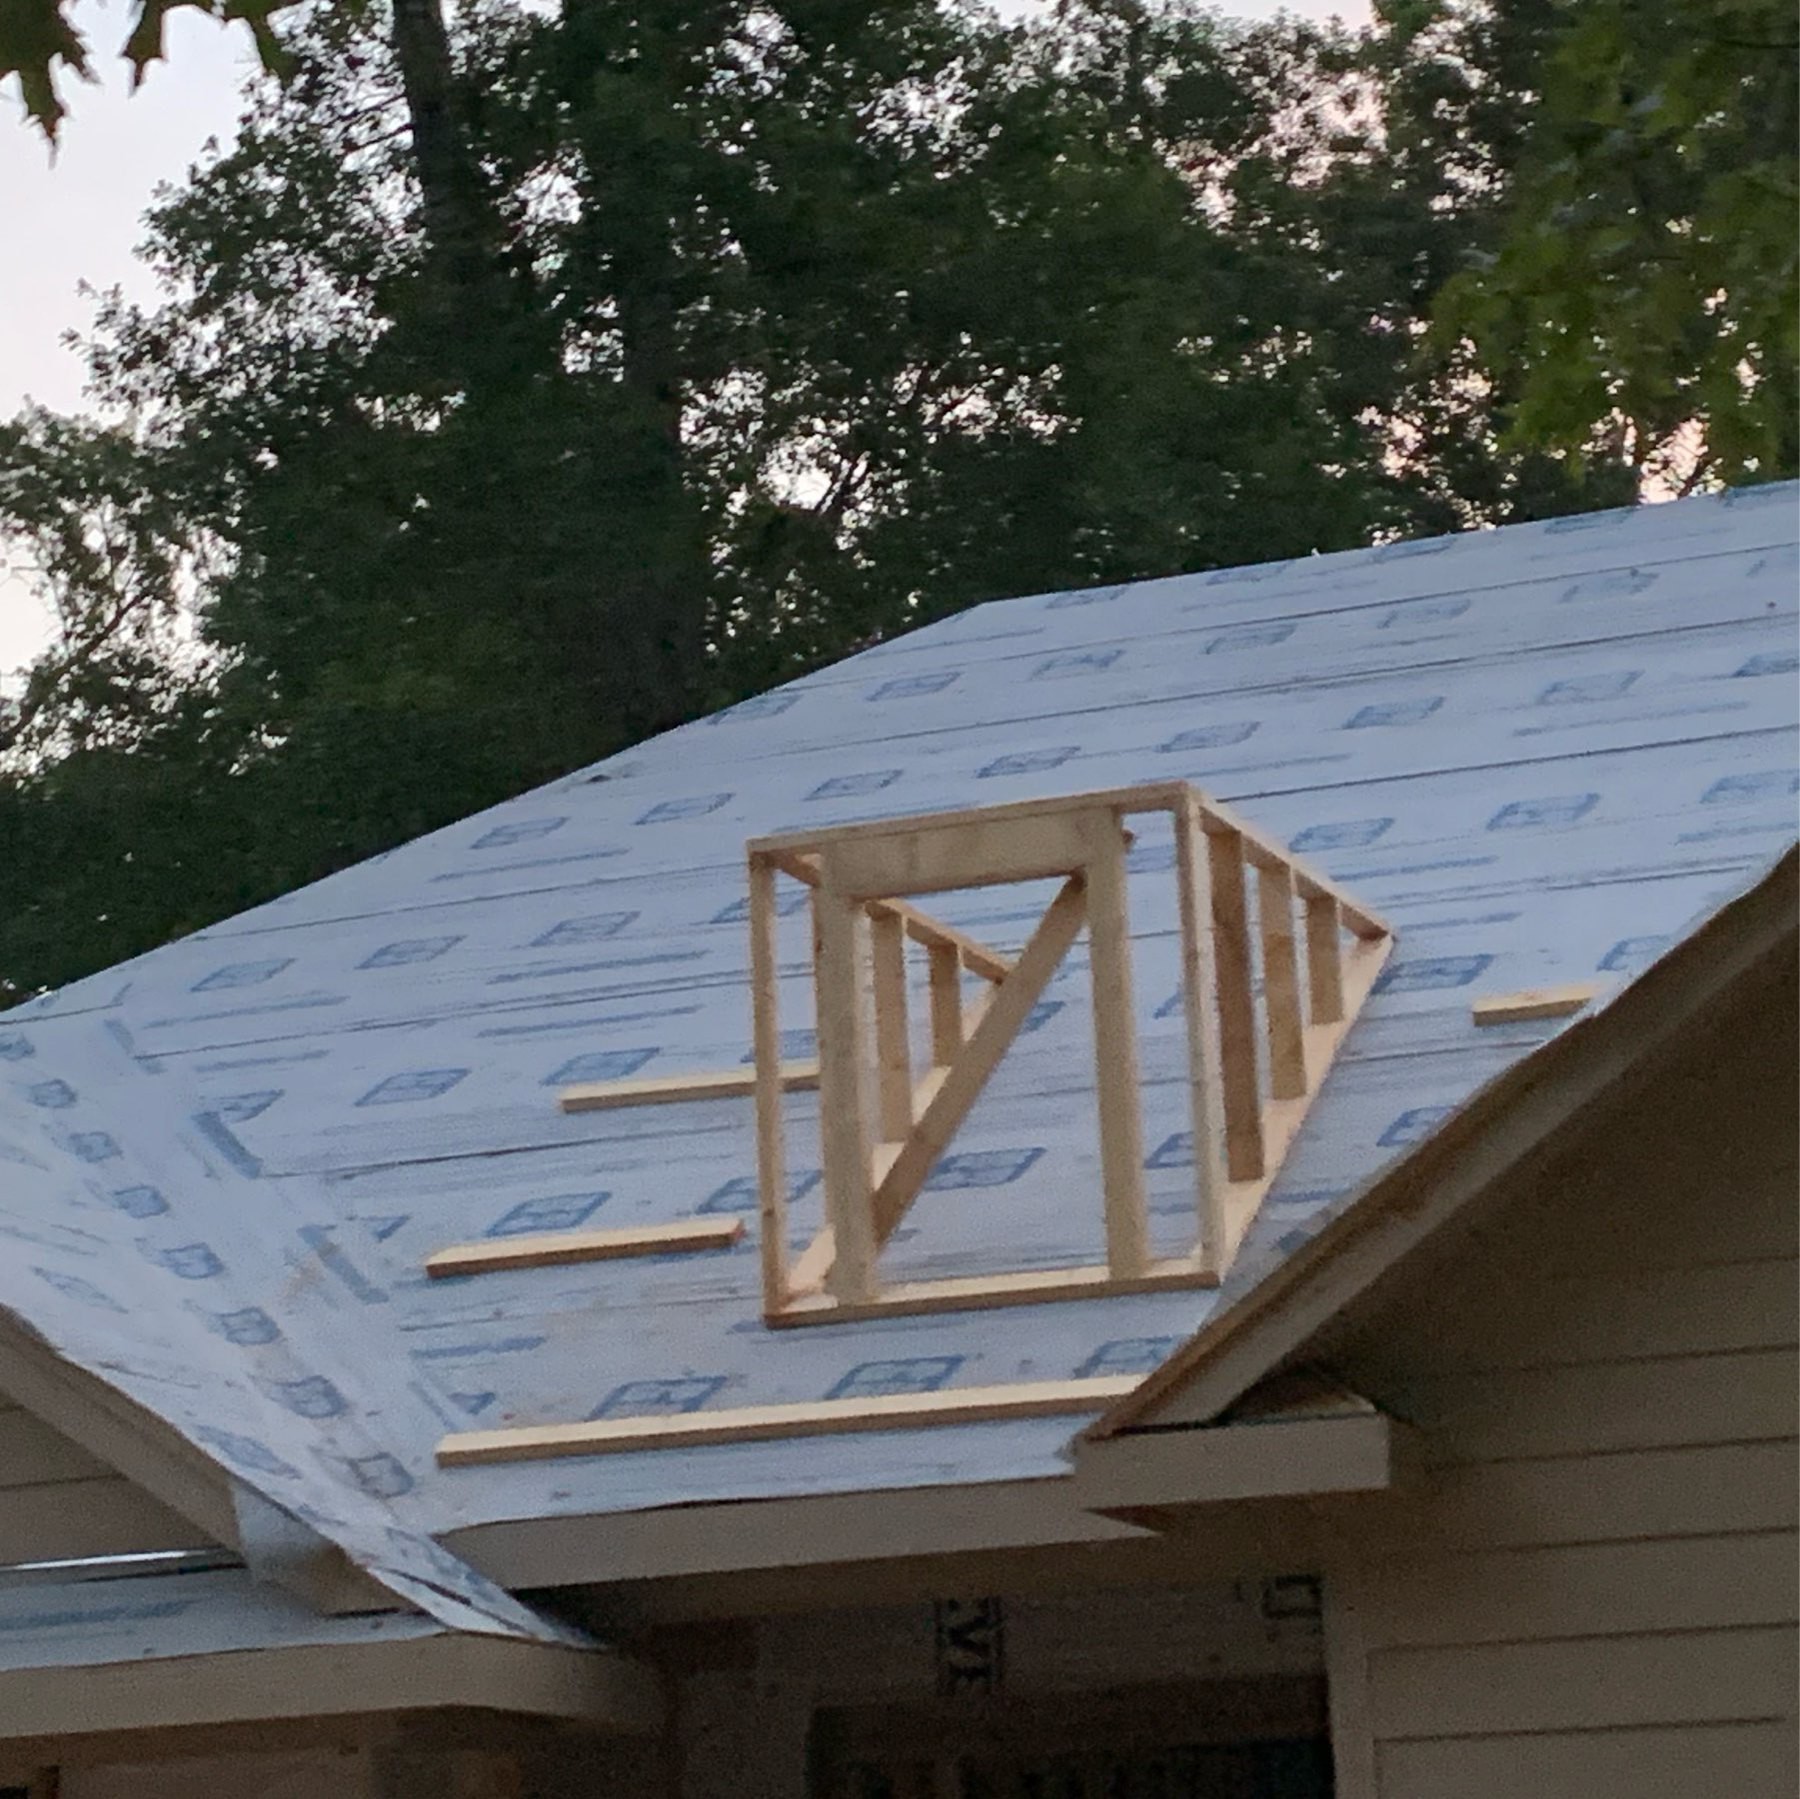 Fake window framed on roof of new home construction